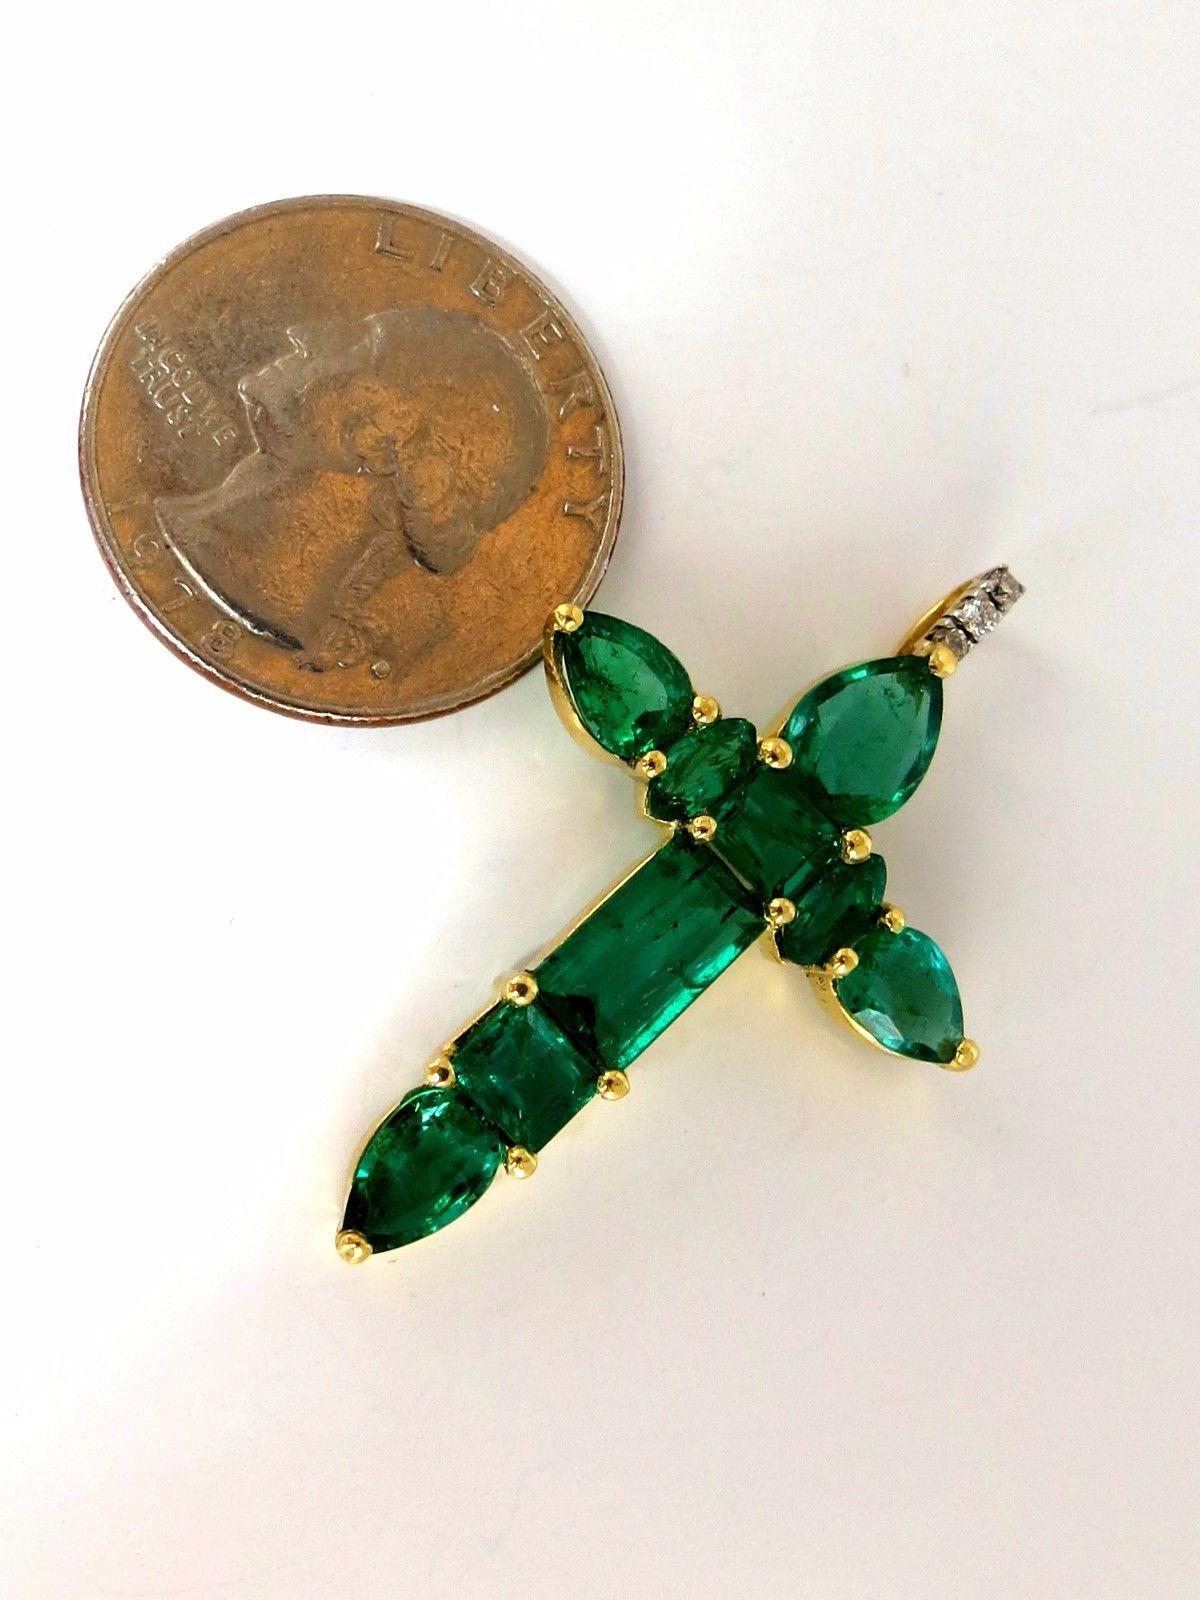 Vivid Greens.

6.05 Natural Emeralds cross

The prime Zambia luster and transparency

clean clarity & transparent.



Pears, Emerald Cuts, Marquise and round diamonds.

.05ct. G- Colors Vs-2 clarity.

1.6 X 1.05 inch

18kt yellow gold

total weight: